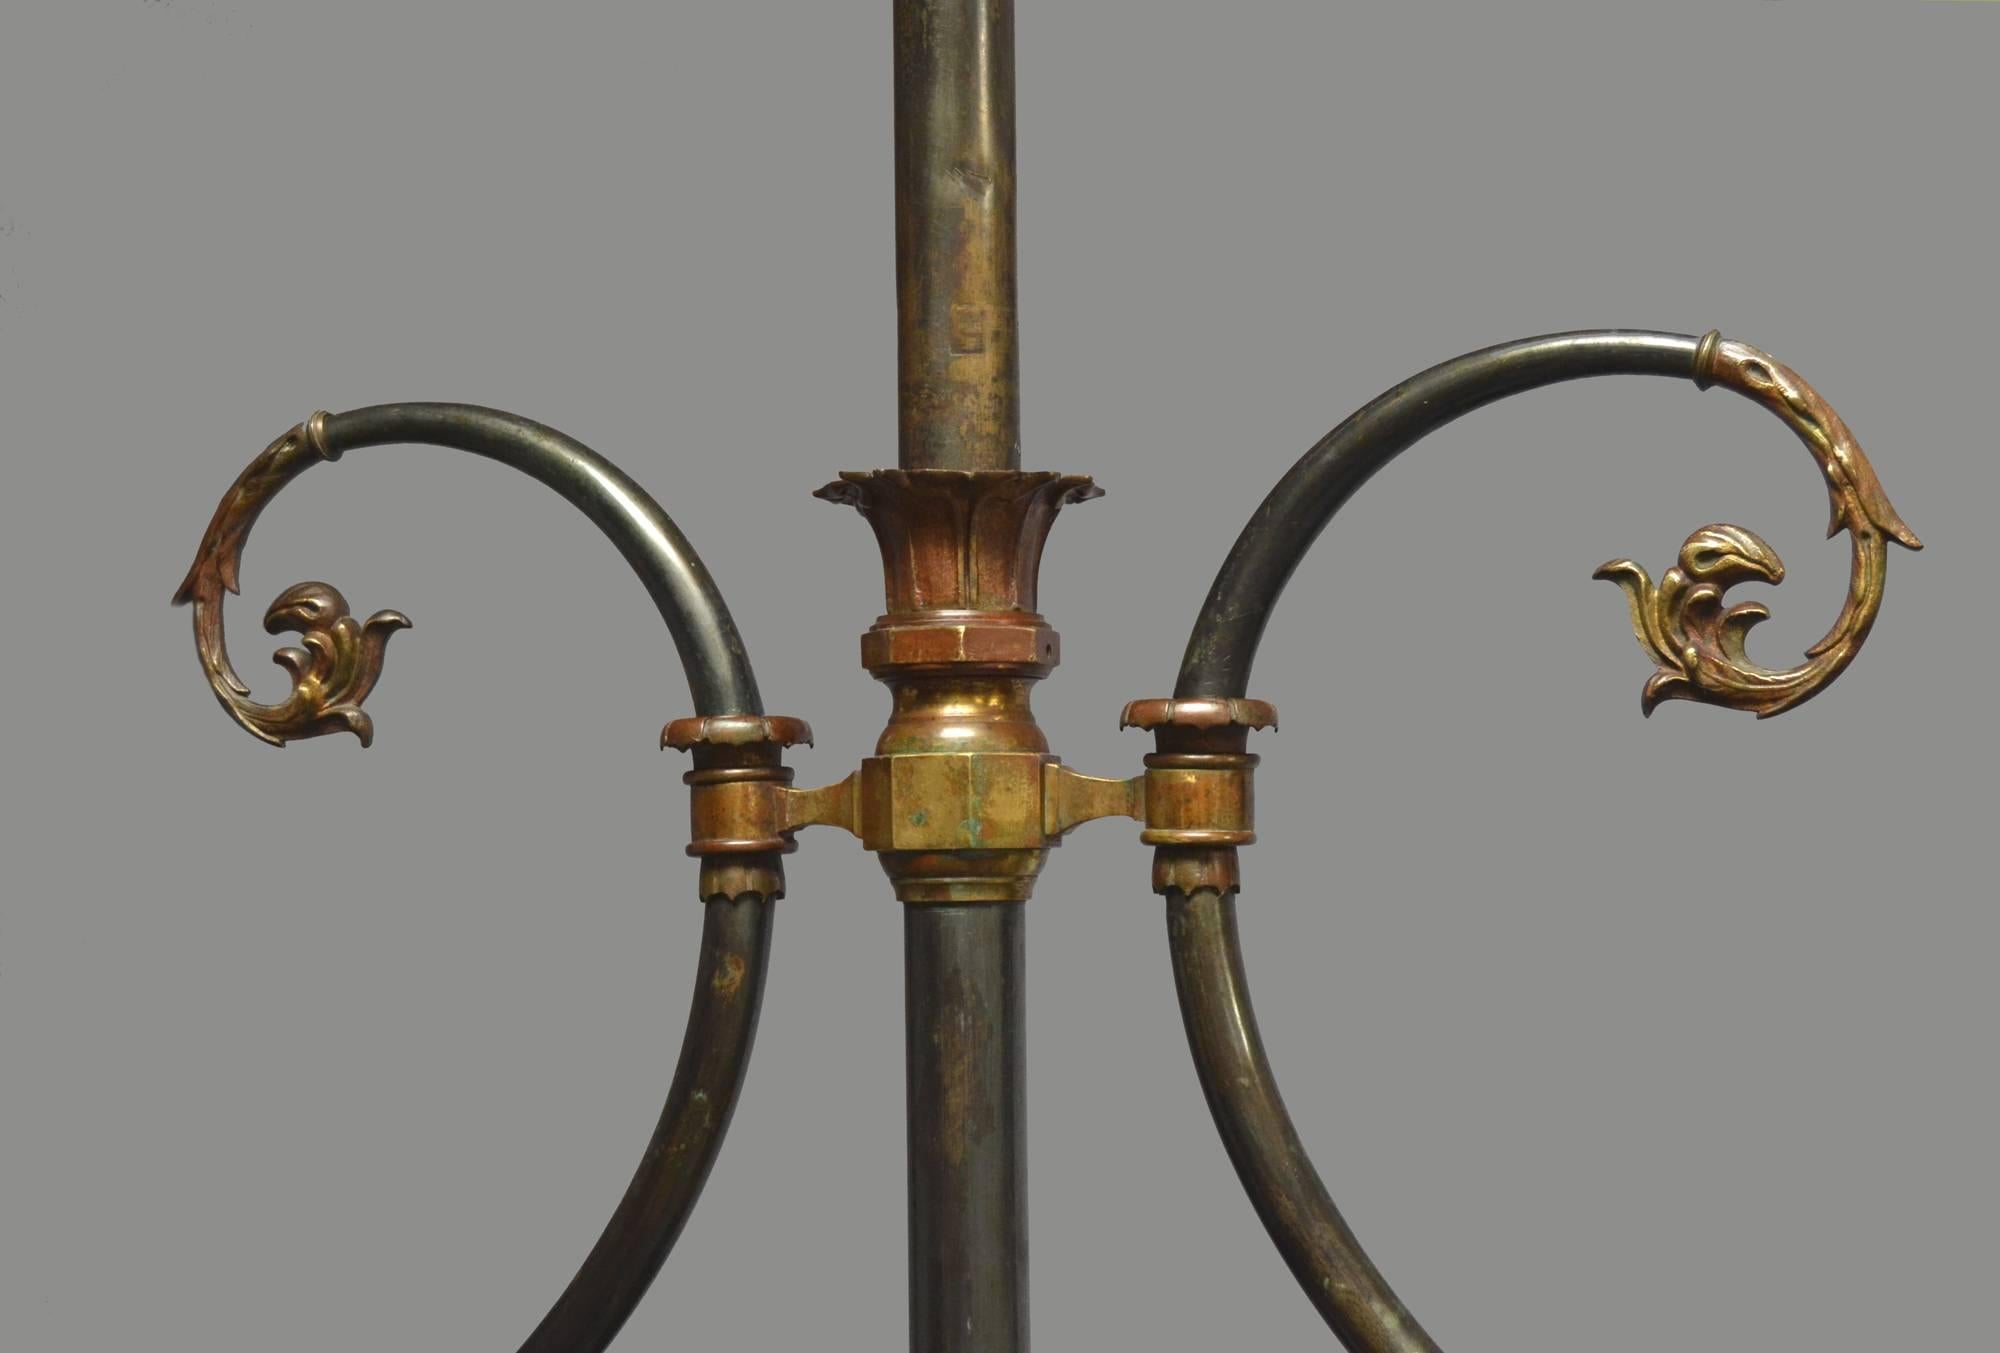 A fantastic brass framed billiard light with foliate castings, a central coronet and tapering braces complimented with decorative finials, the color and patina is exceptional, we have purposely kept the original aged look of this lamp as the various